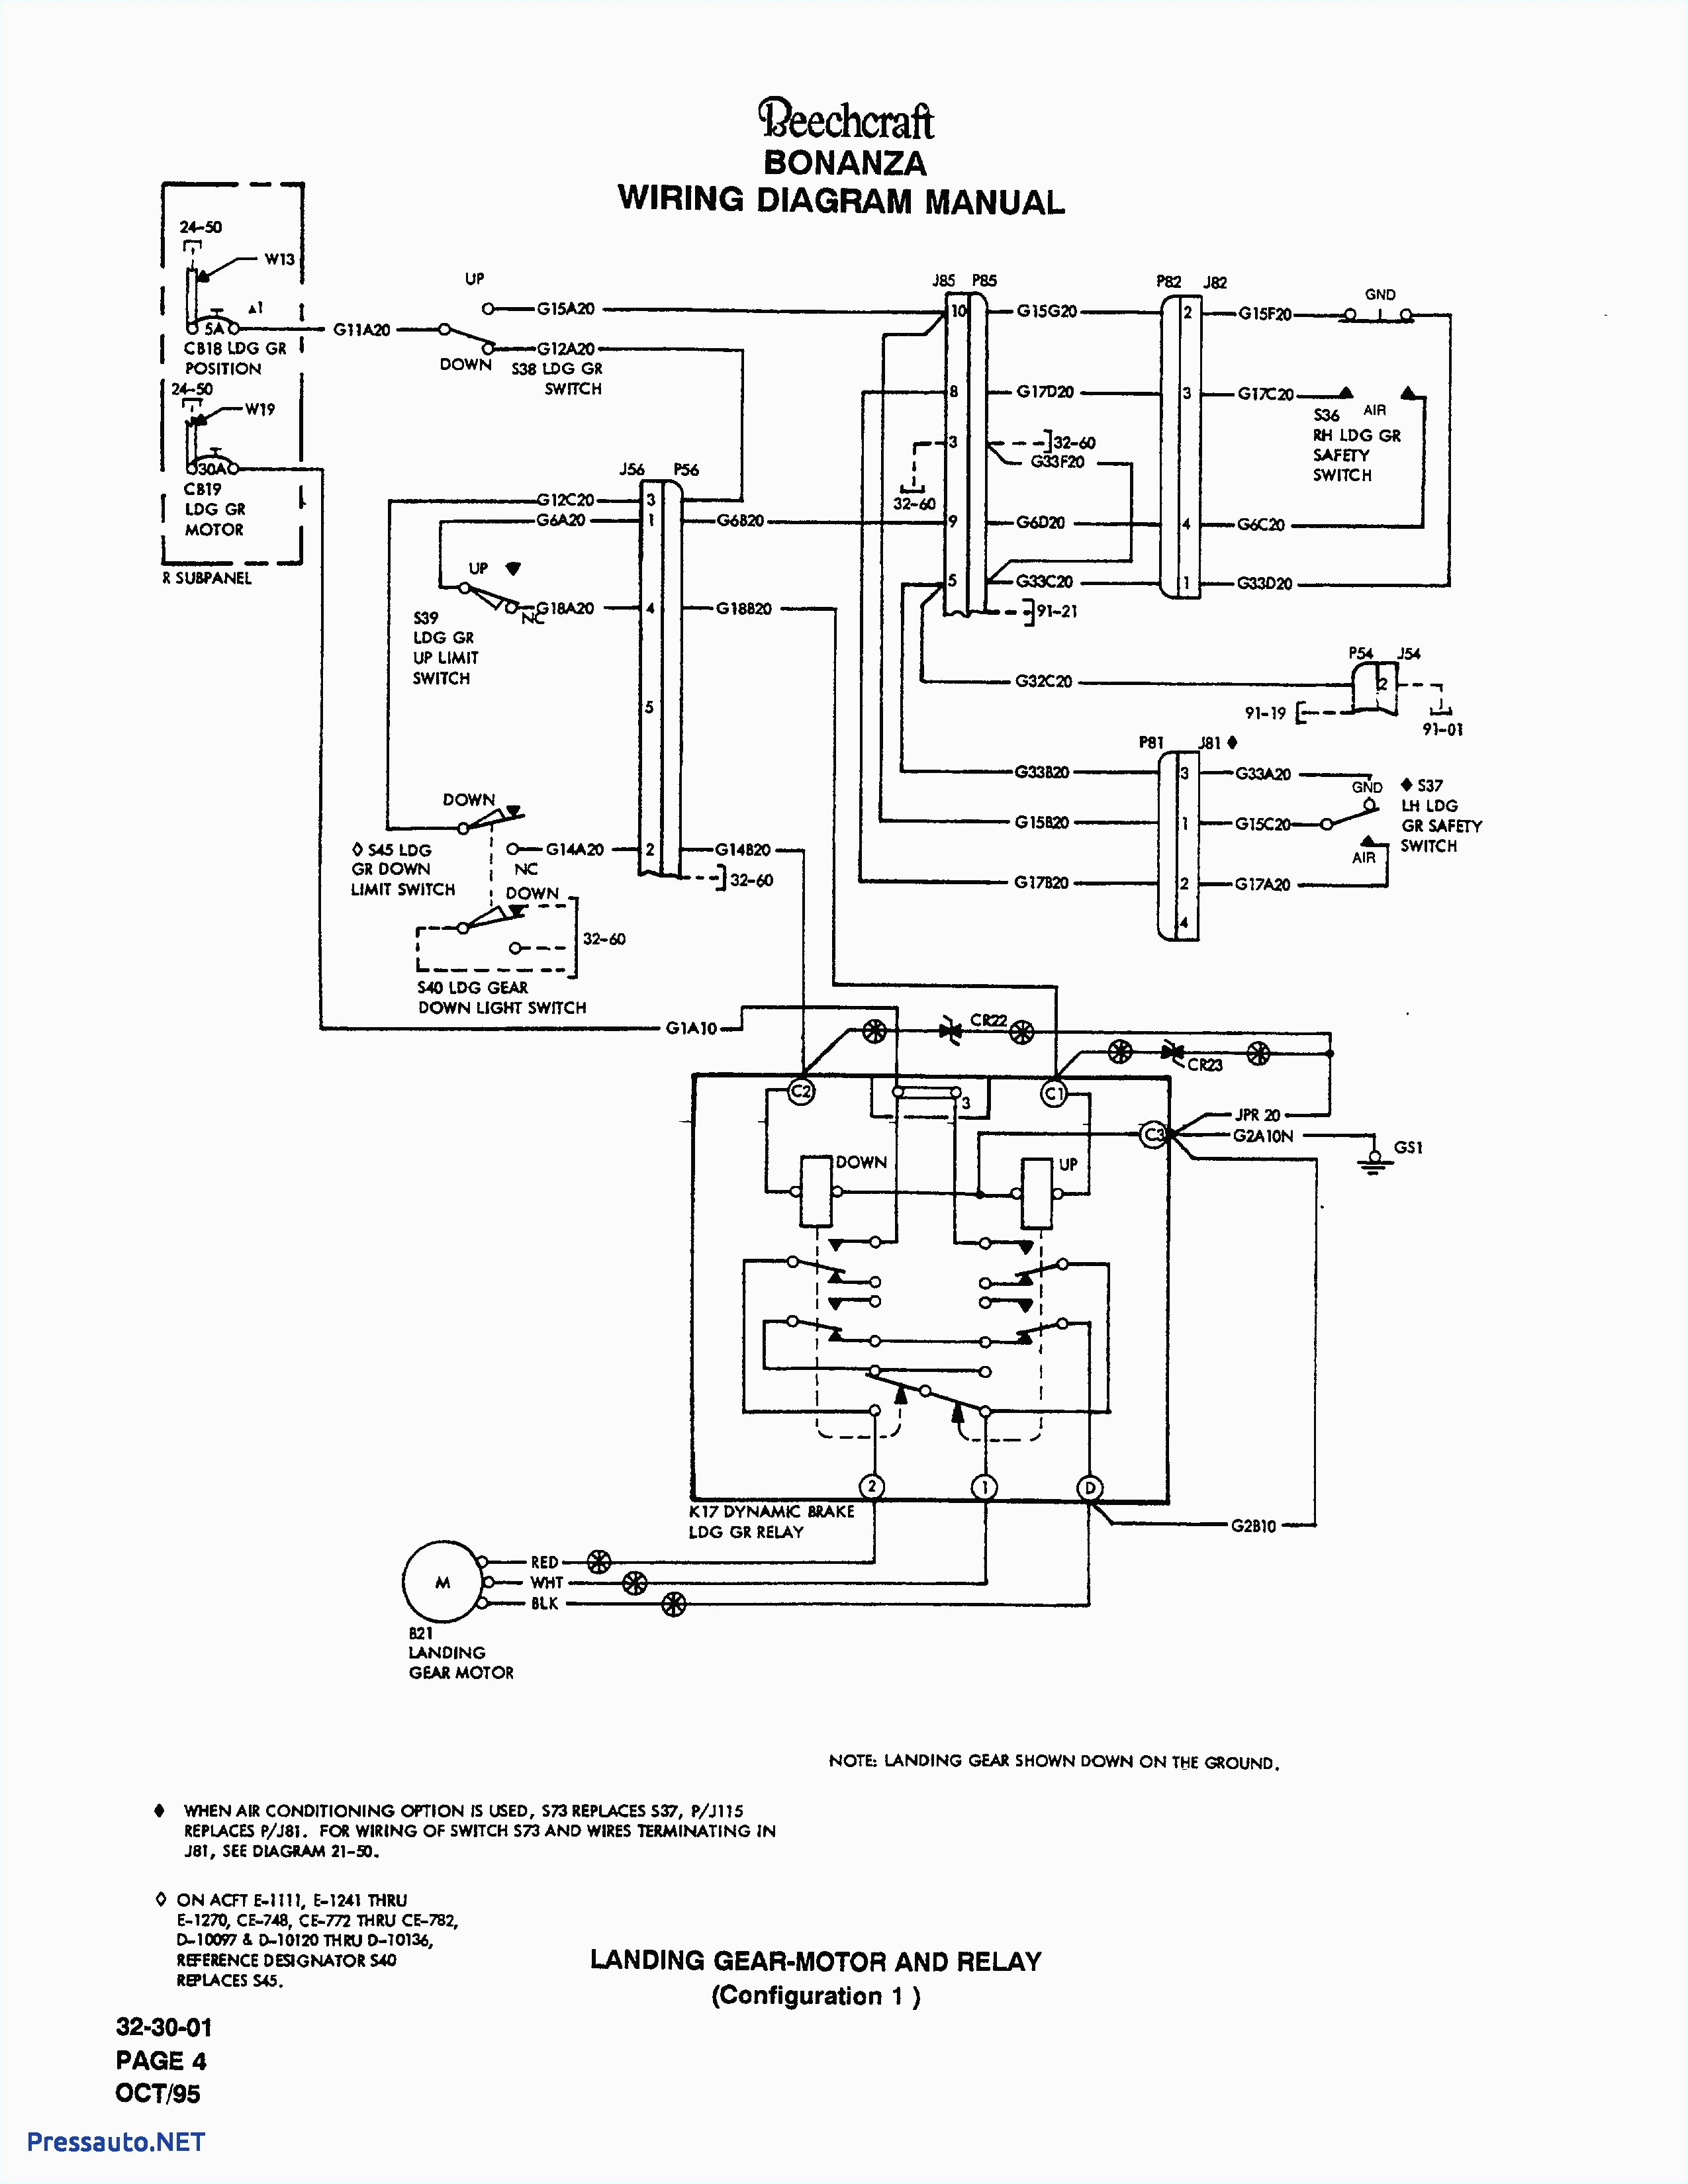 Fisher Poly Caster Wiring Diagram Fisher Poly Caster Wiring Diagram Inspirational Fisher Poly Caster